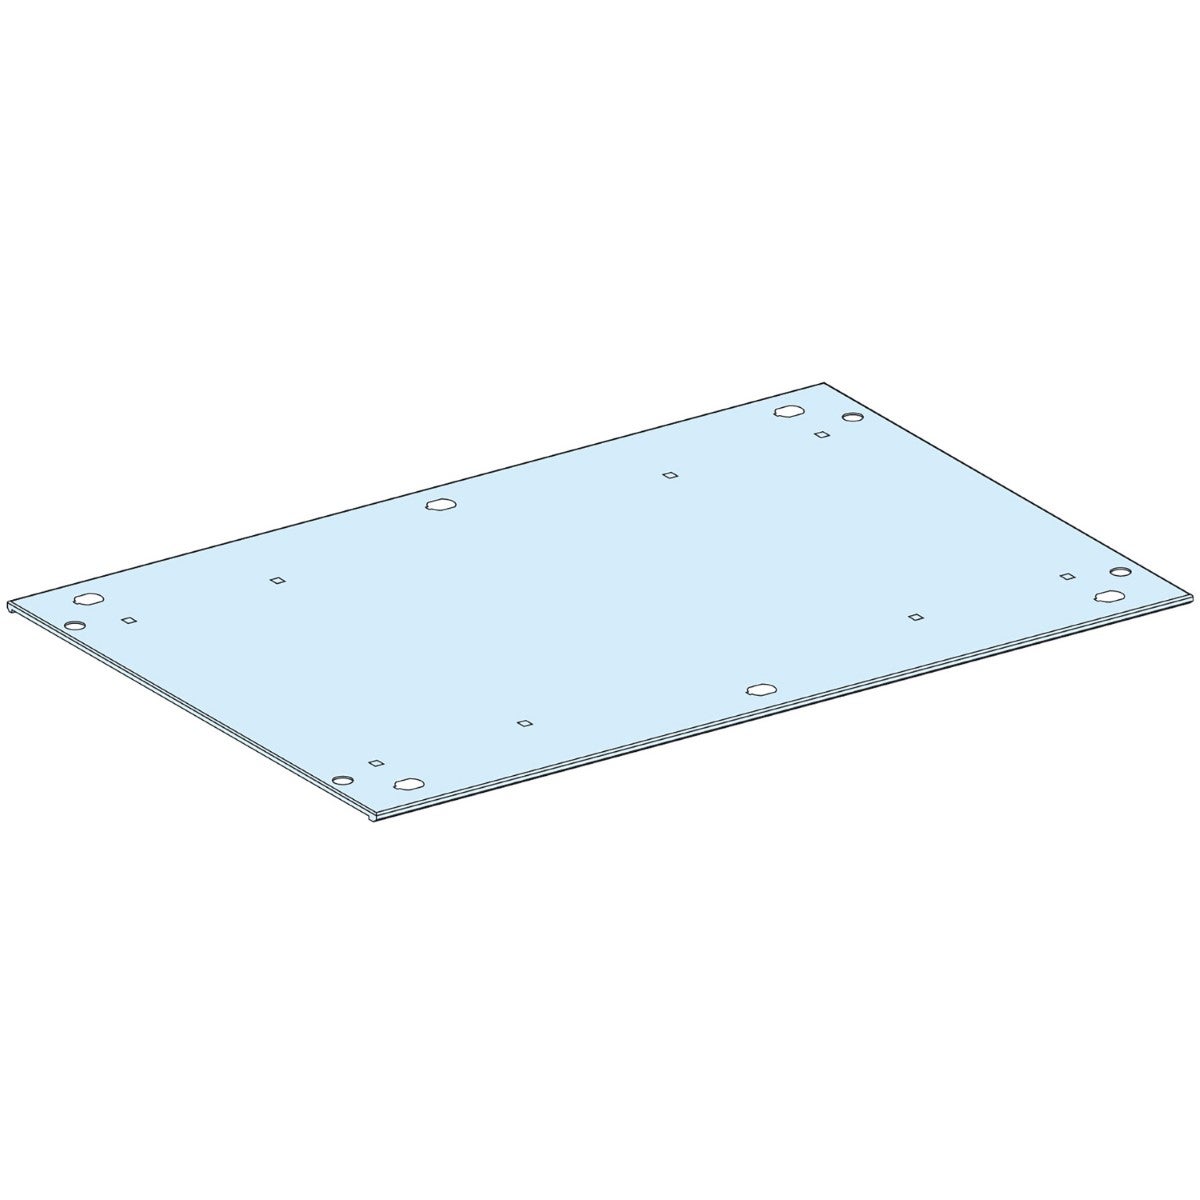 Roof plate, PrismaSeT P, for enclosure, W650mm, D400mm, IP30, white, RAL 9003